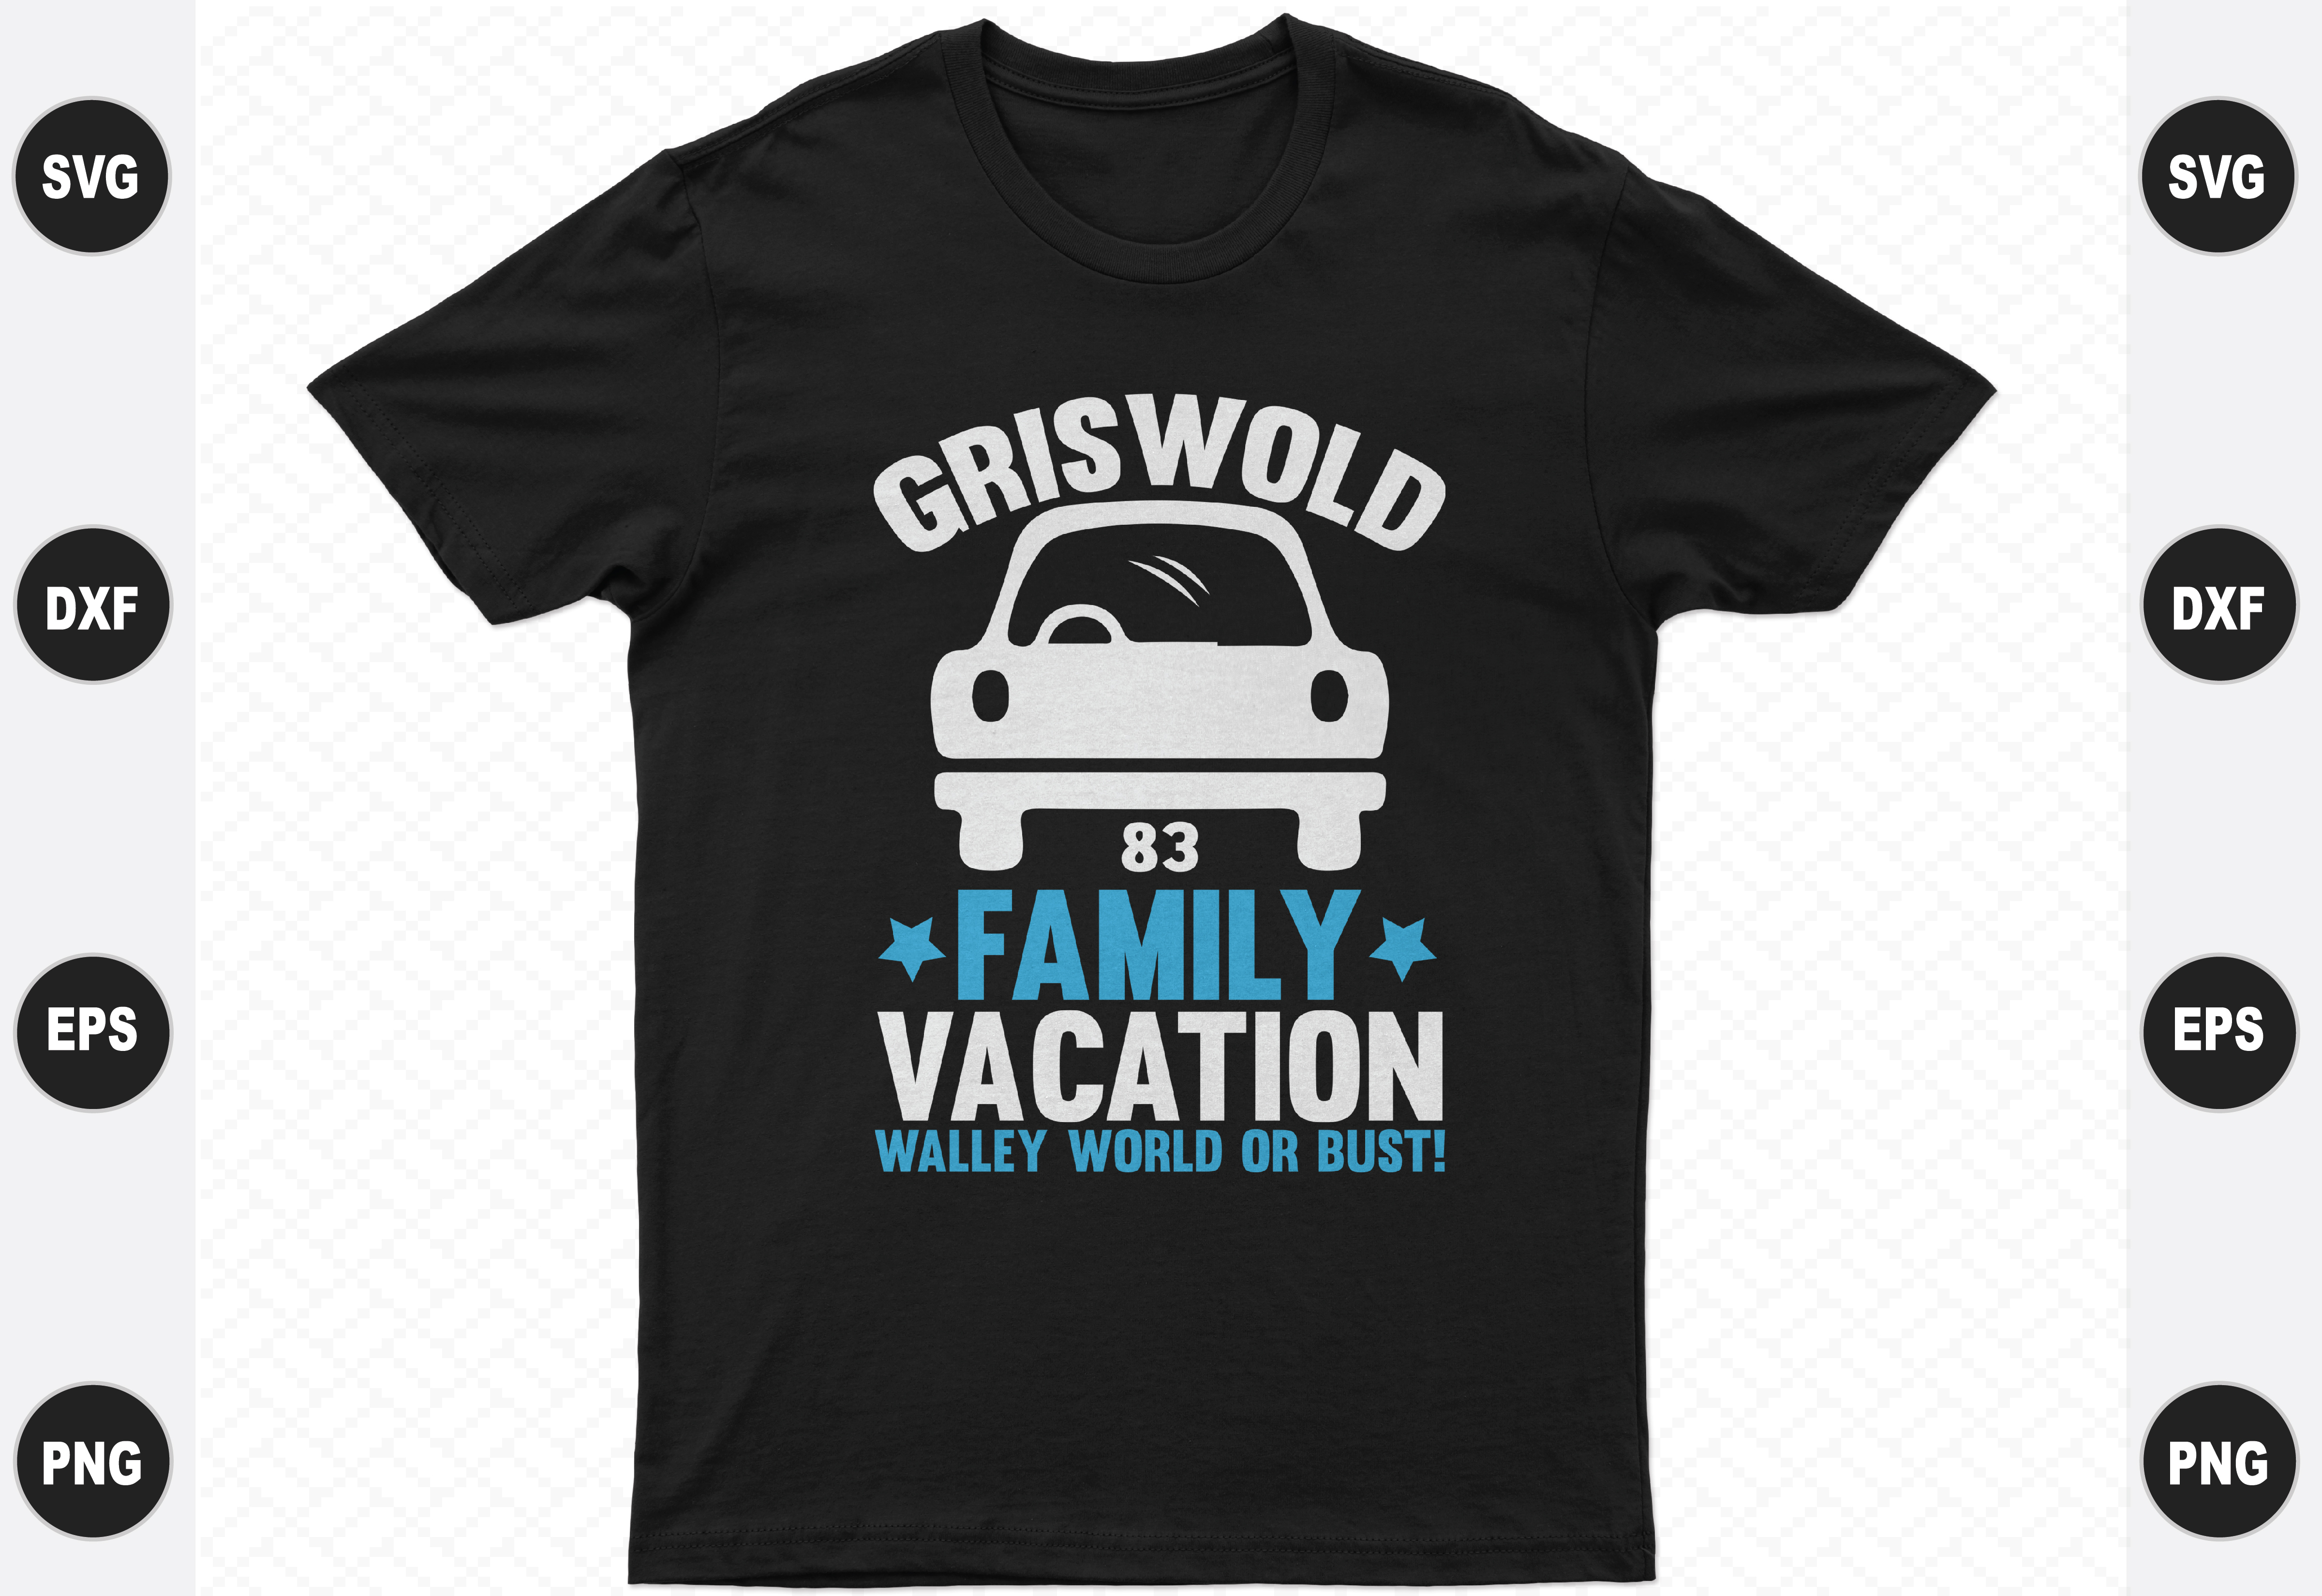 Download Griswold Family Vacation Design Graphic By Bdb Graphics Creative Fabrica